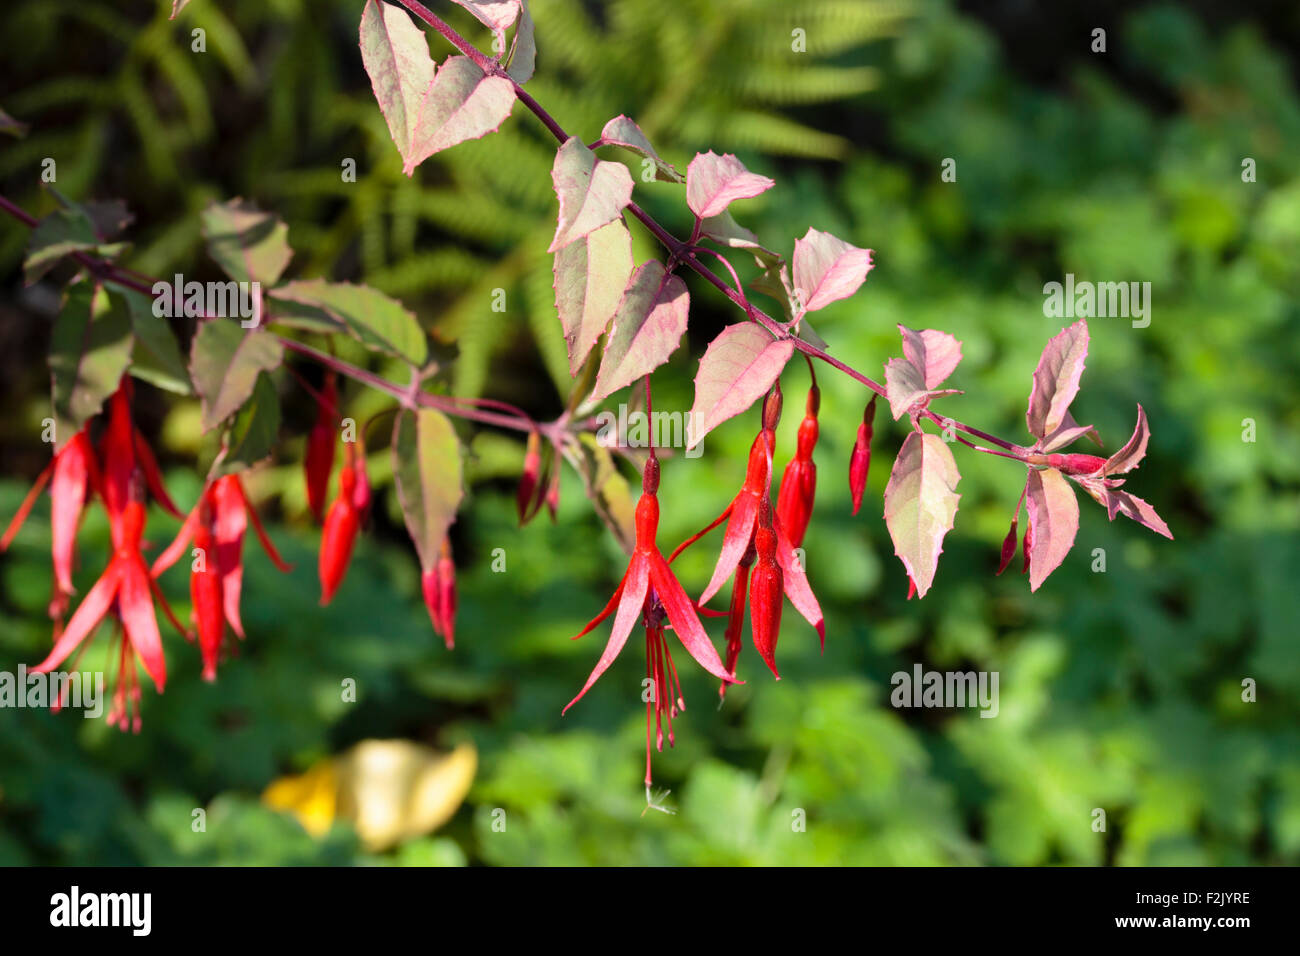 Pink and grey streaked foliage and red flowers of the hardy shrub, Fuchsia magellanica 'Versicolor' Stock Photo